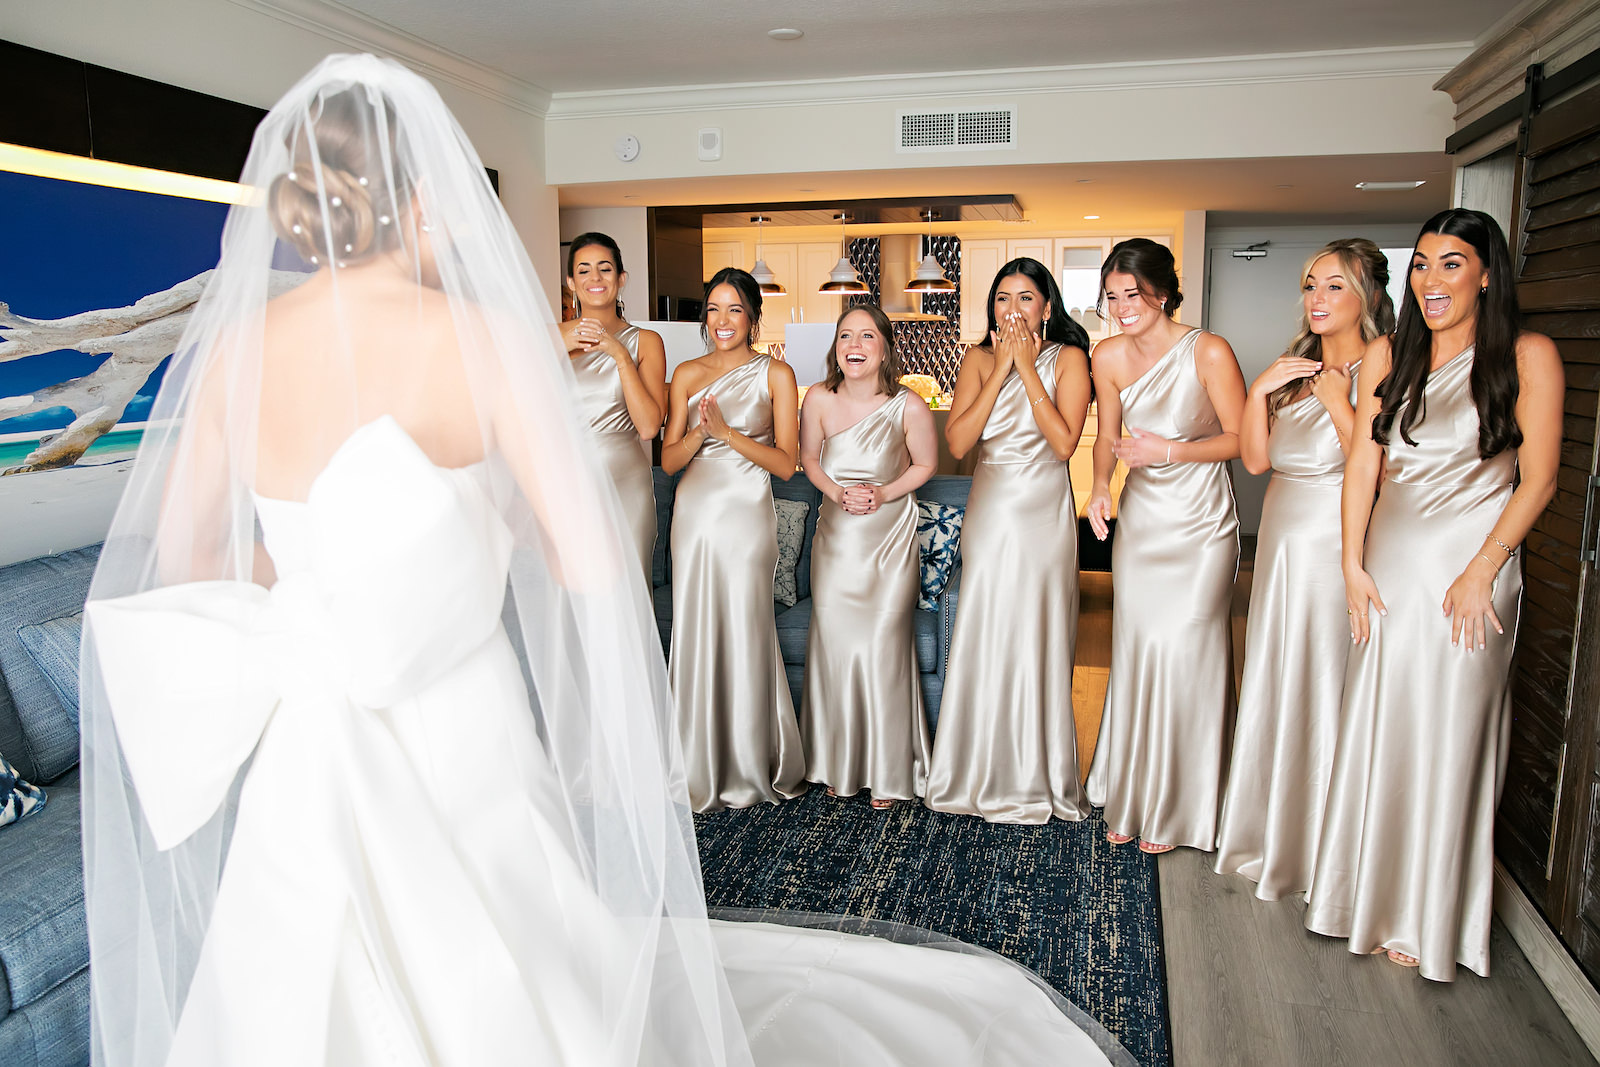 Luxurious Modern Bride and Bridesmaids in Matching Champagne Dresses First Look Wedding Portrait | Tampa Bay Wedding Photographer Limelight Photography